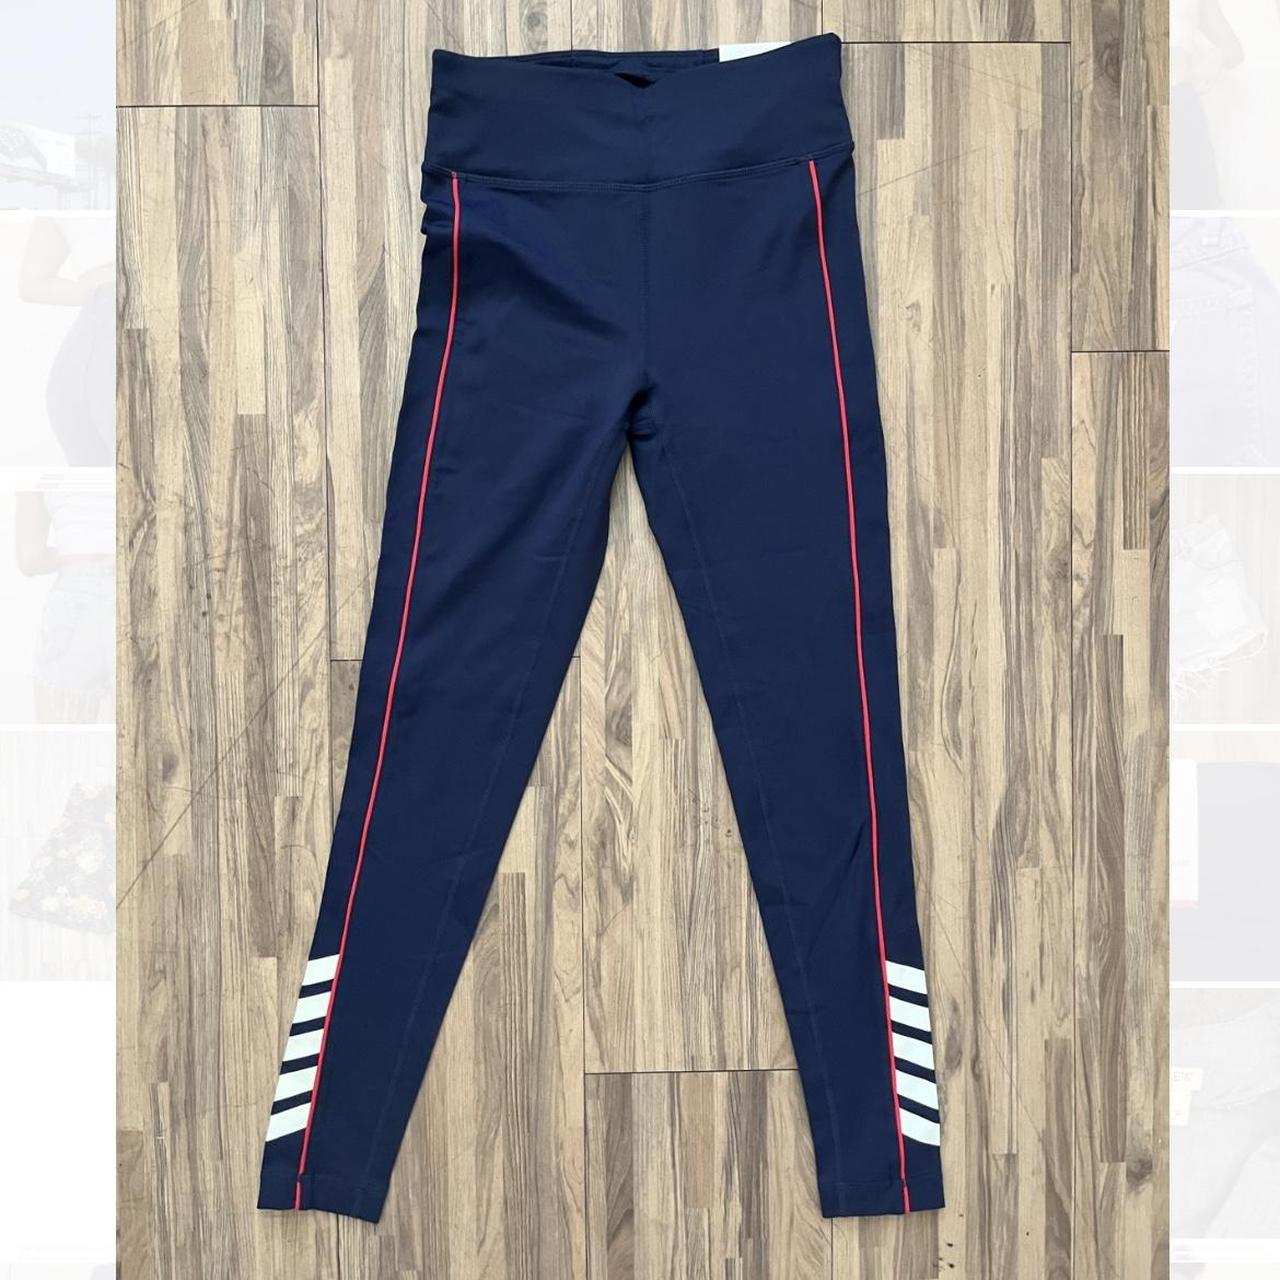 tommy hilfiger sport leggings, brand new with tags, - Depop